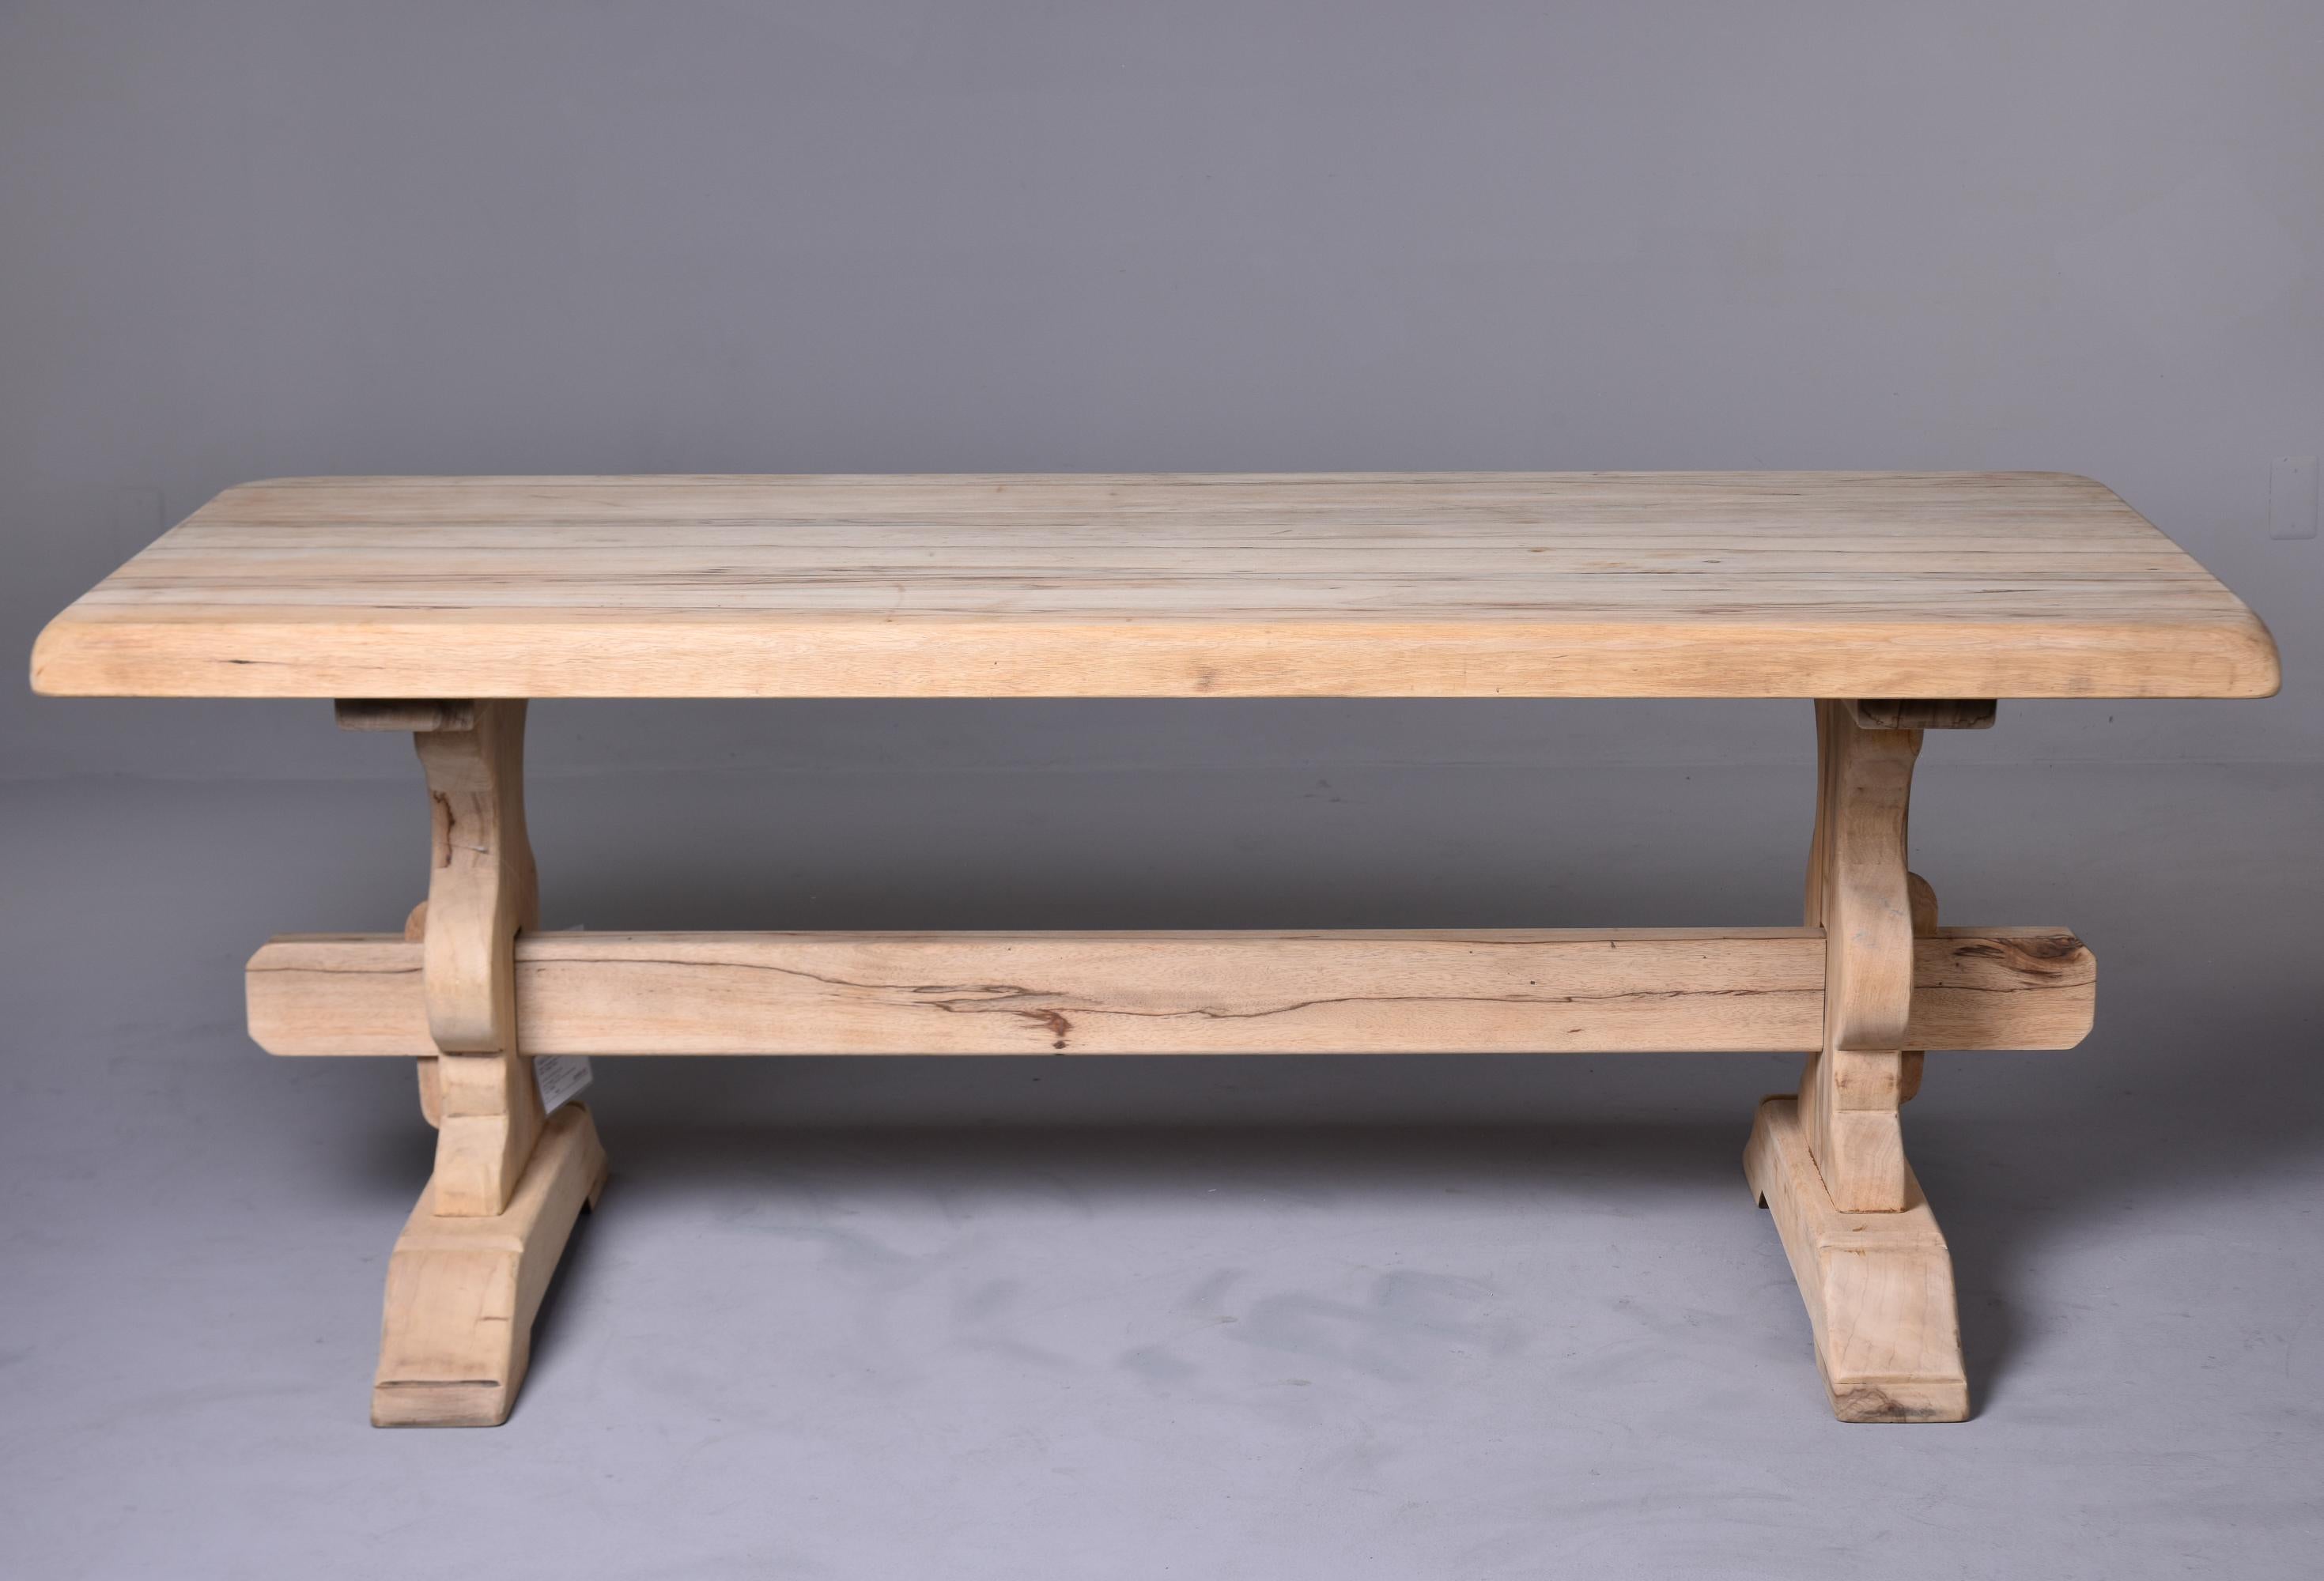 French Provincial 19th C Sanded Bare Oak French Country Farm Trestle Table  